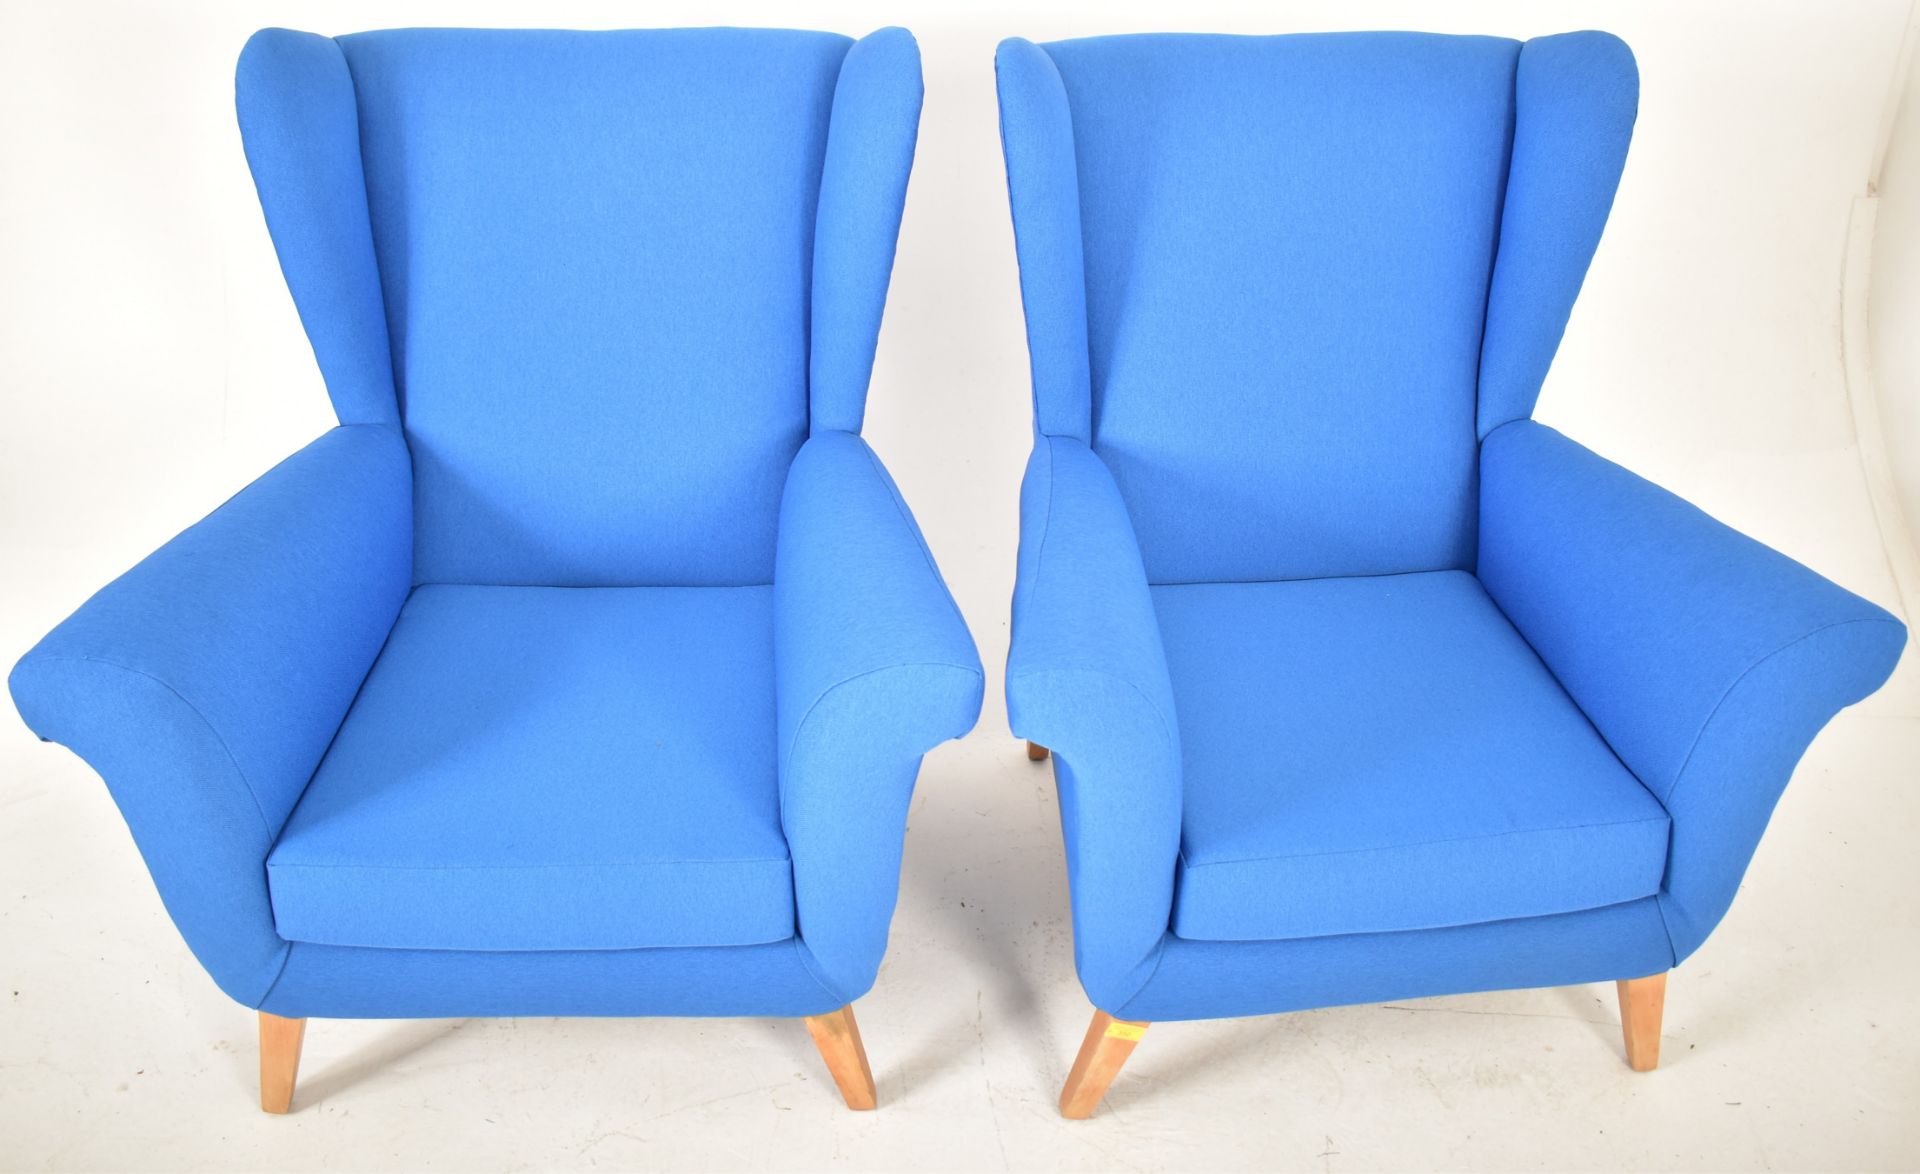 HOWARD KEITH - AMBASSADOR CHAIR - PAIR OF WINGBACK ARMCHAIRS - Image 2 of 5